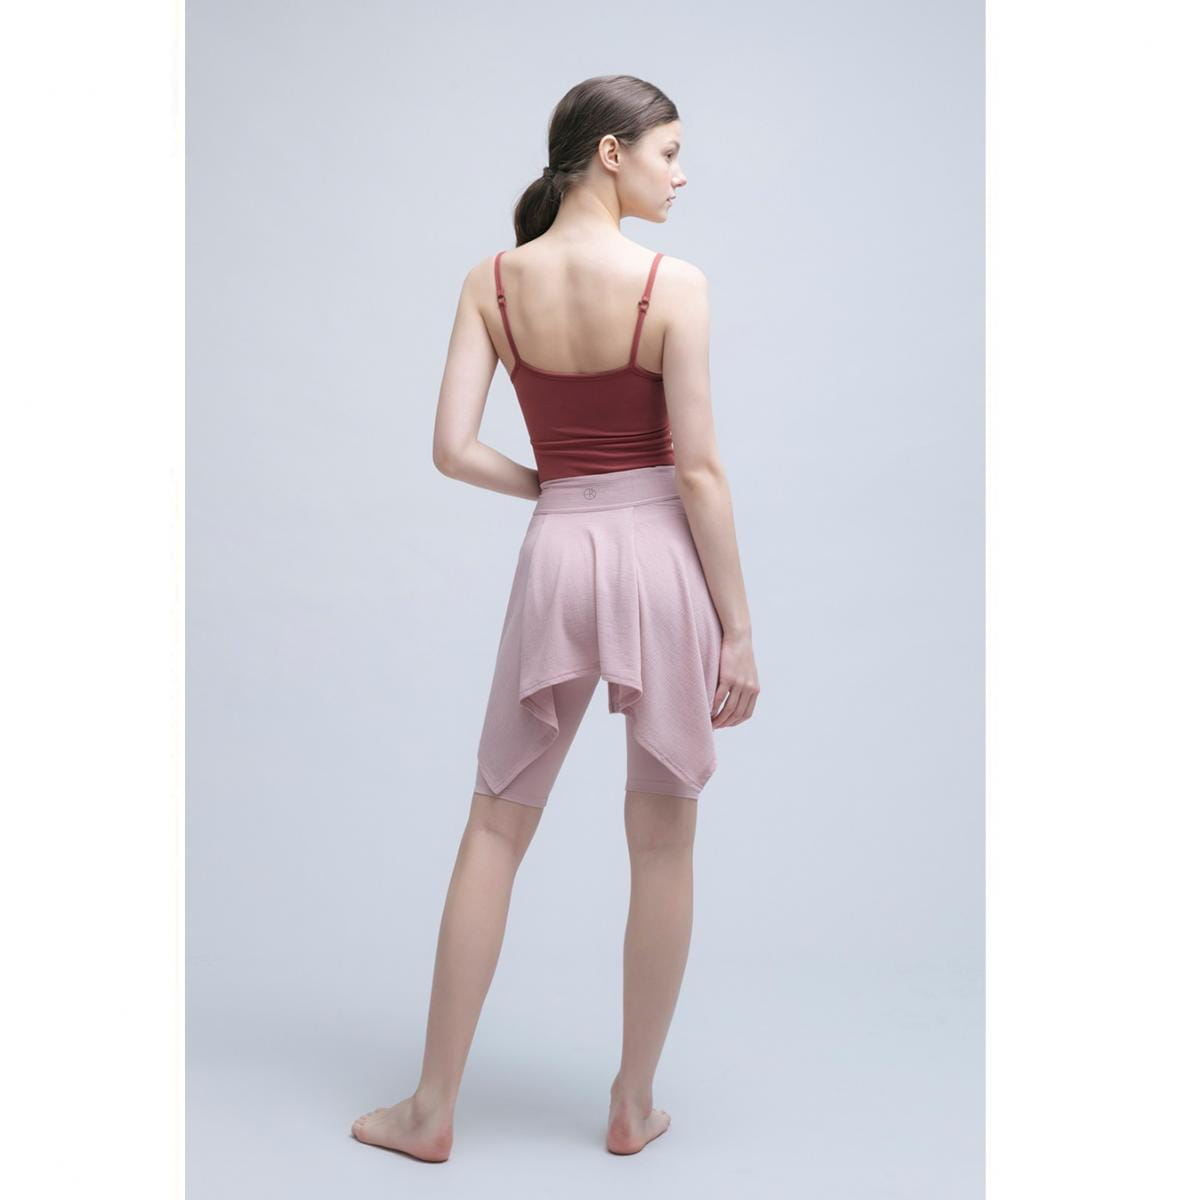 【BARREL】FIT LEGGINGS COVER UP 美臀罩衫 #DUSTY PINK 3